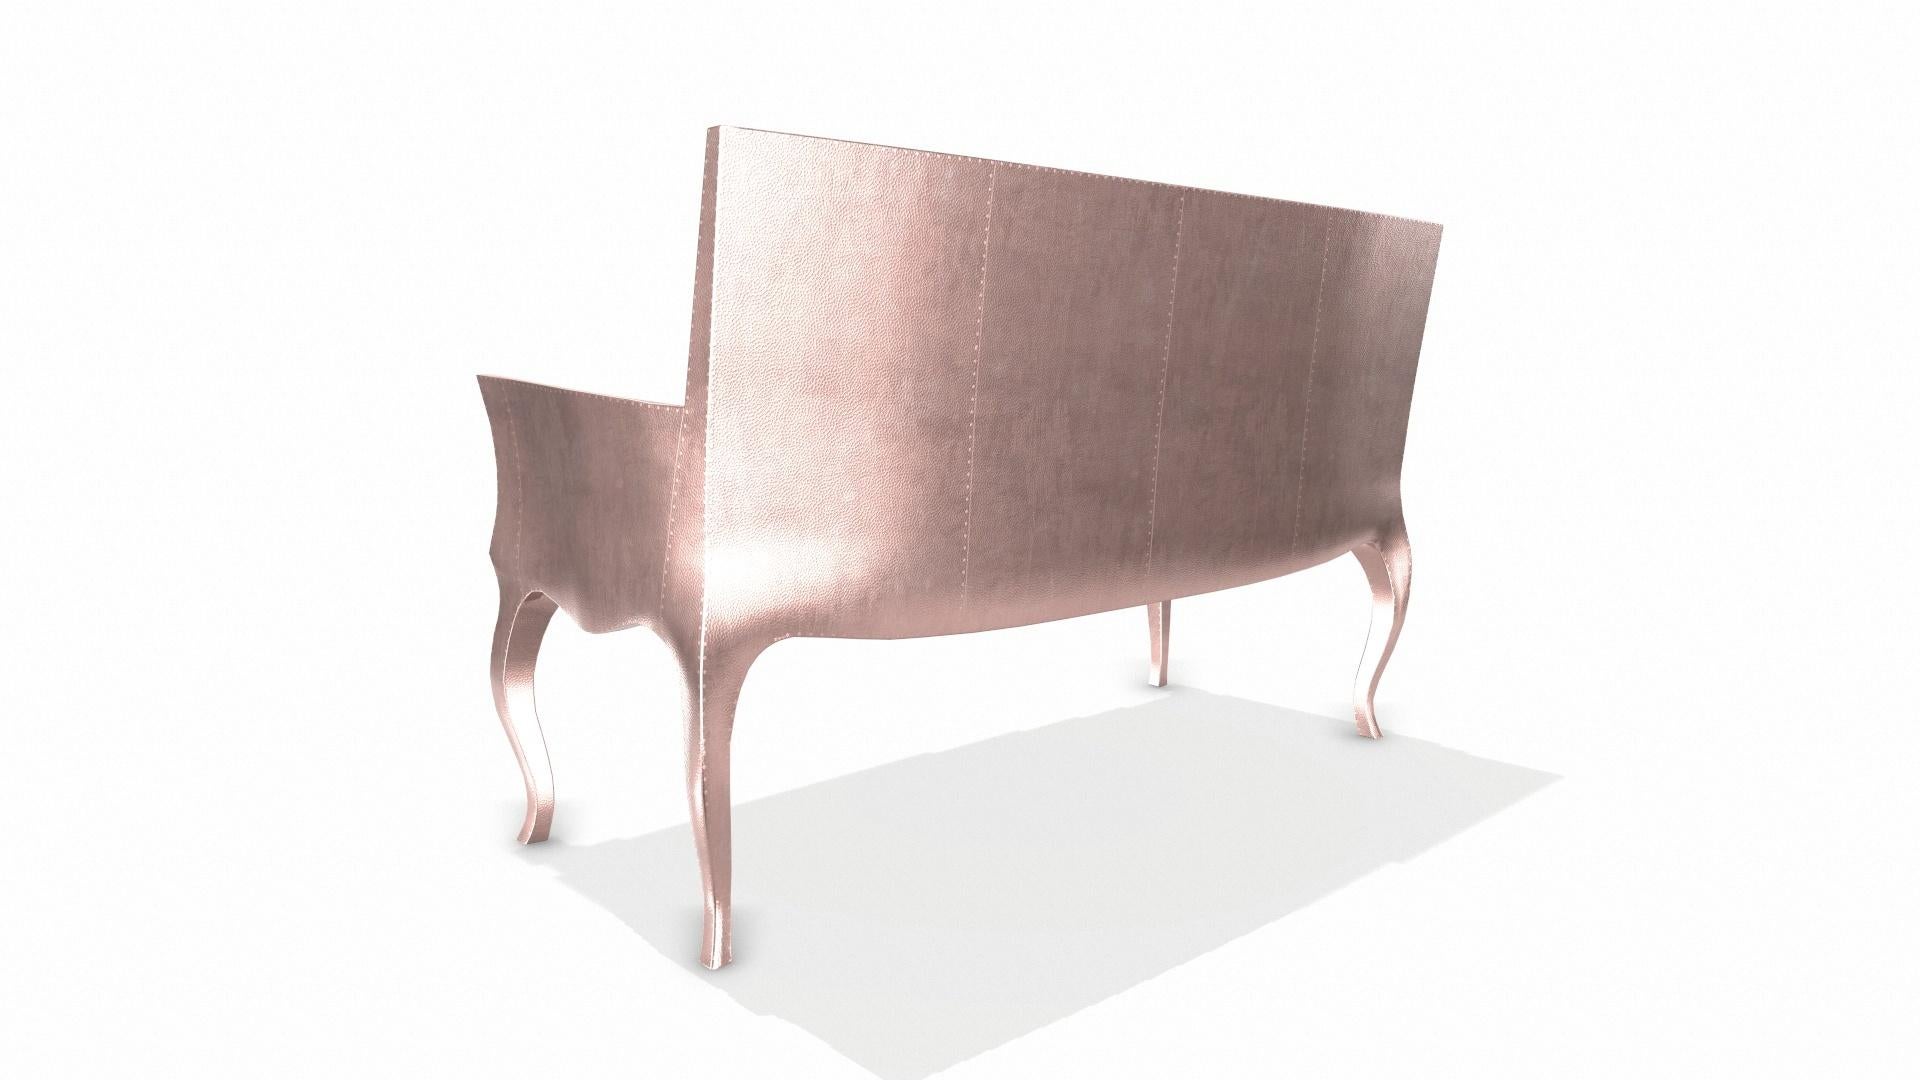 Louise Settee Art Deco Daybeds in Mid. Hammered Copper by Paul Mathieu For Sale 1